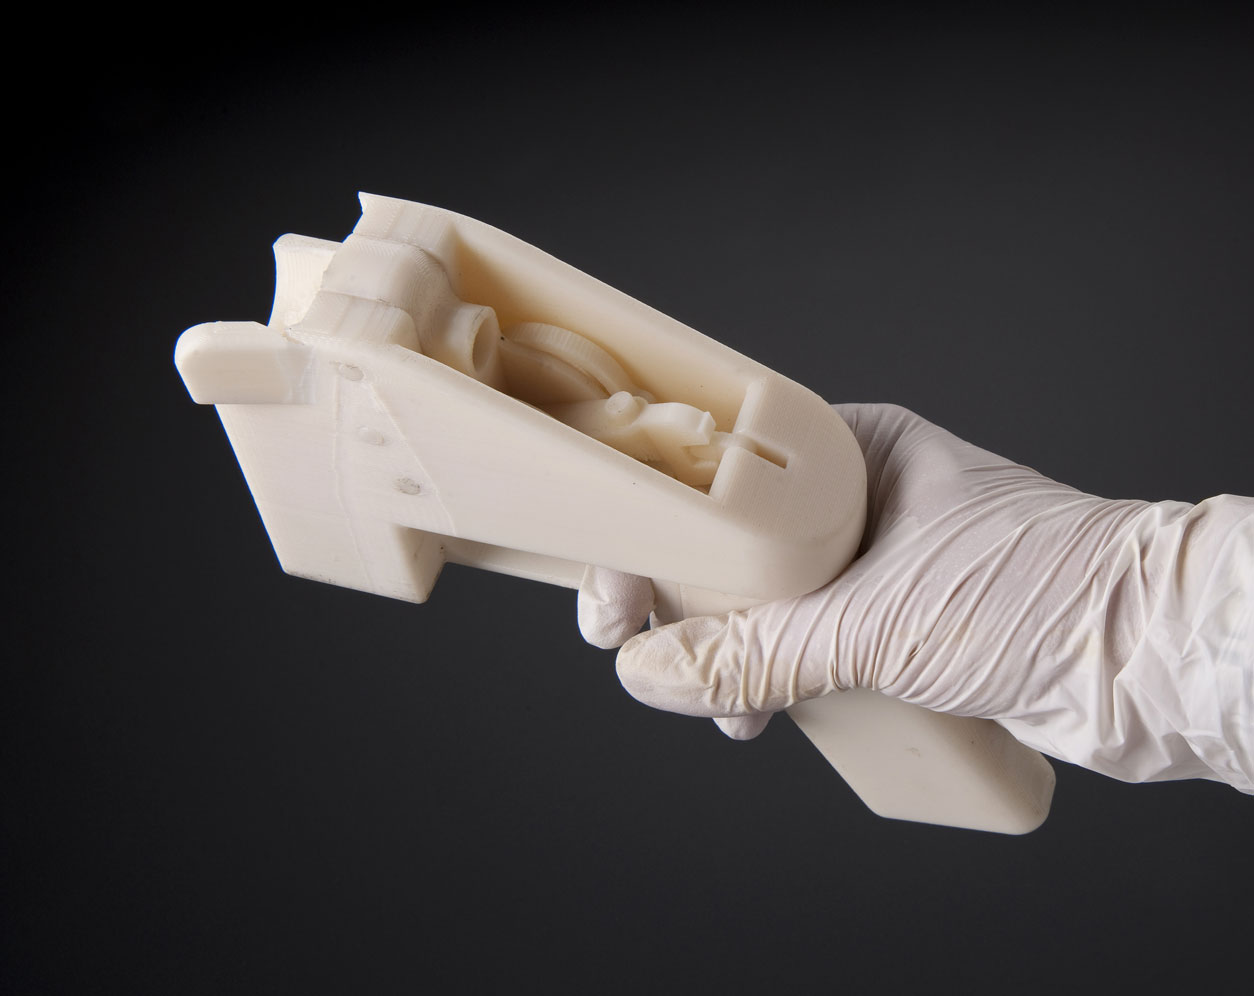 The inside of the 3D printed gun. Image: Science Museum